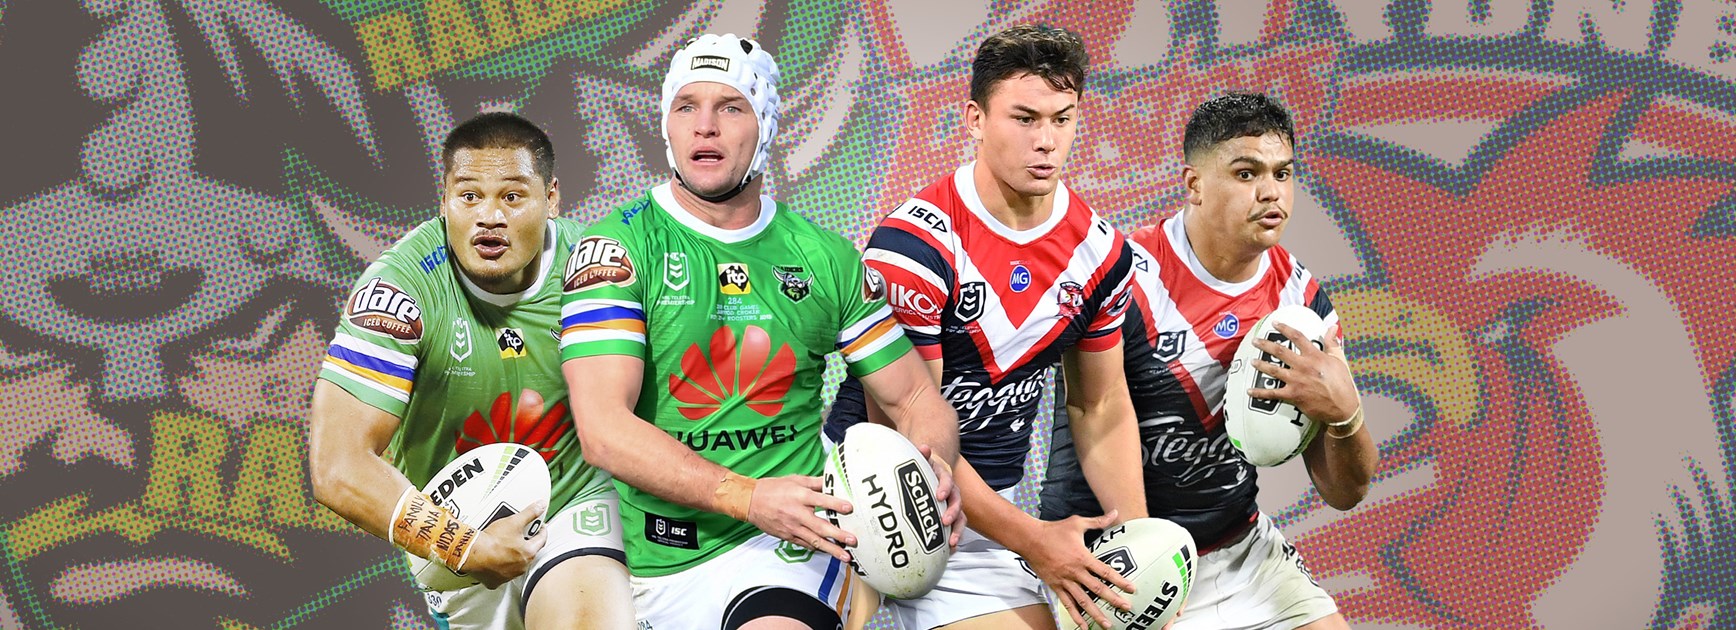 Added class will lift Roosters over Raiders